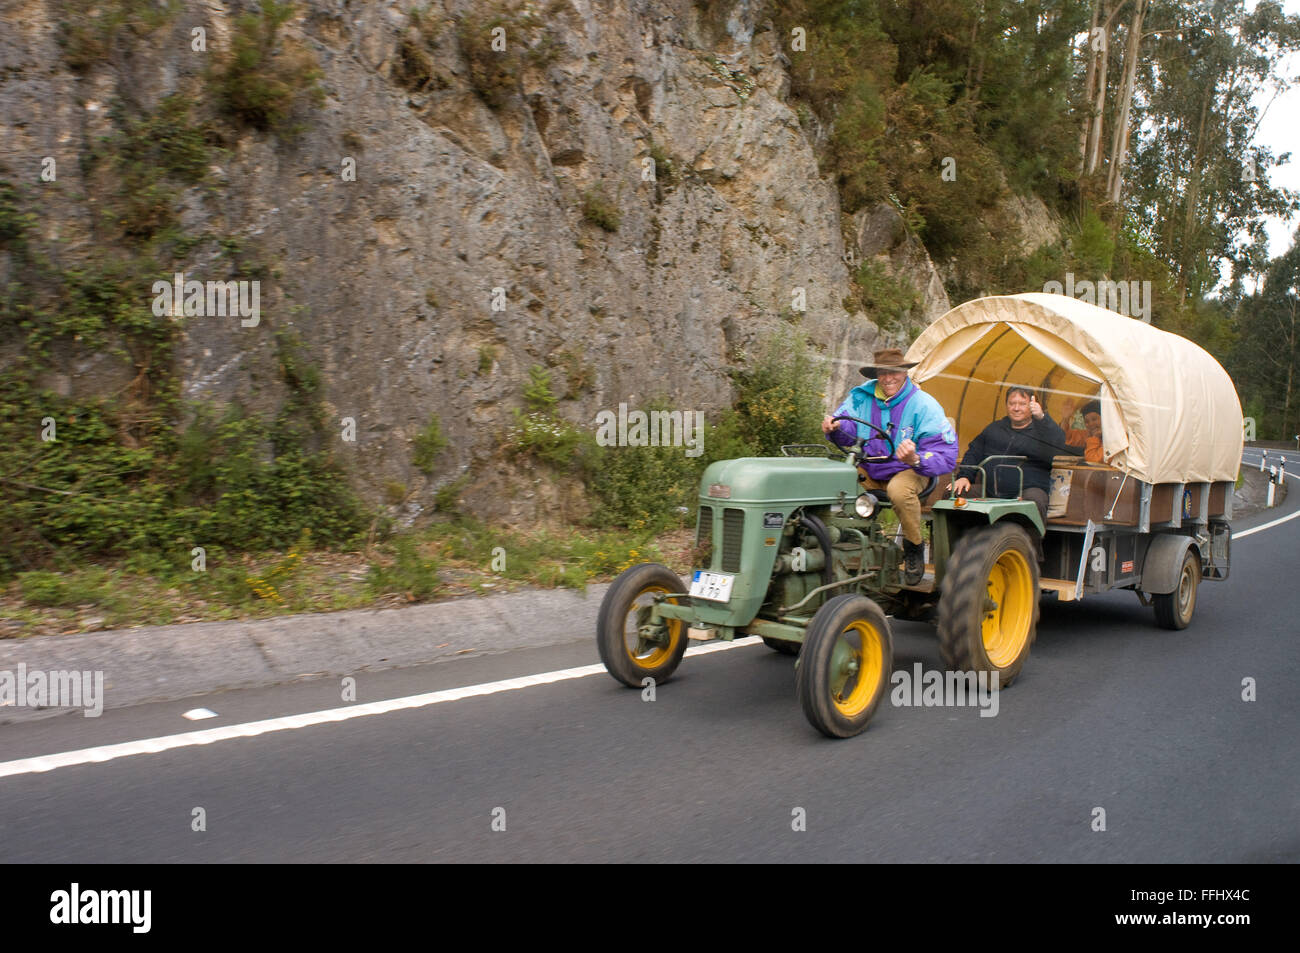 Way of St. James, Jacobean Route. One of the most interesting ways to do the way is to do aboard a vintage tractor. St. James's Stock Photo